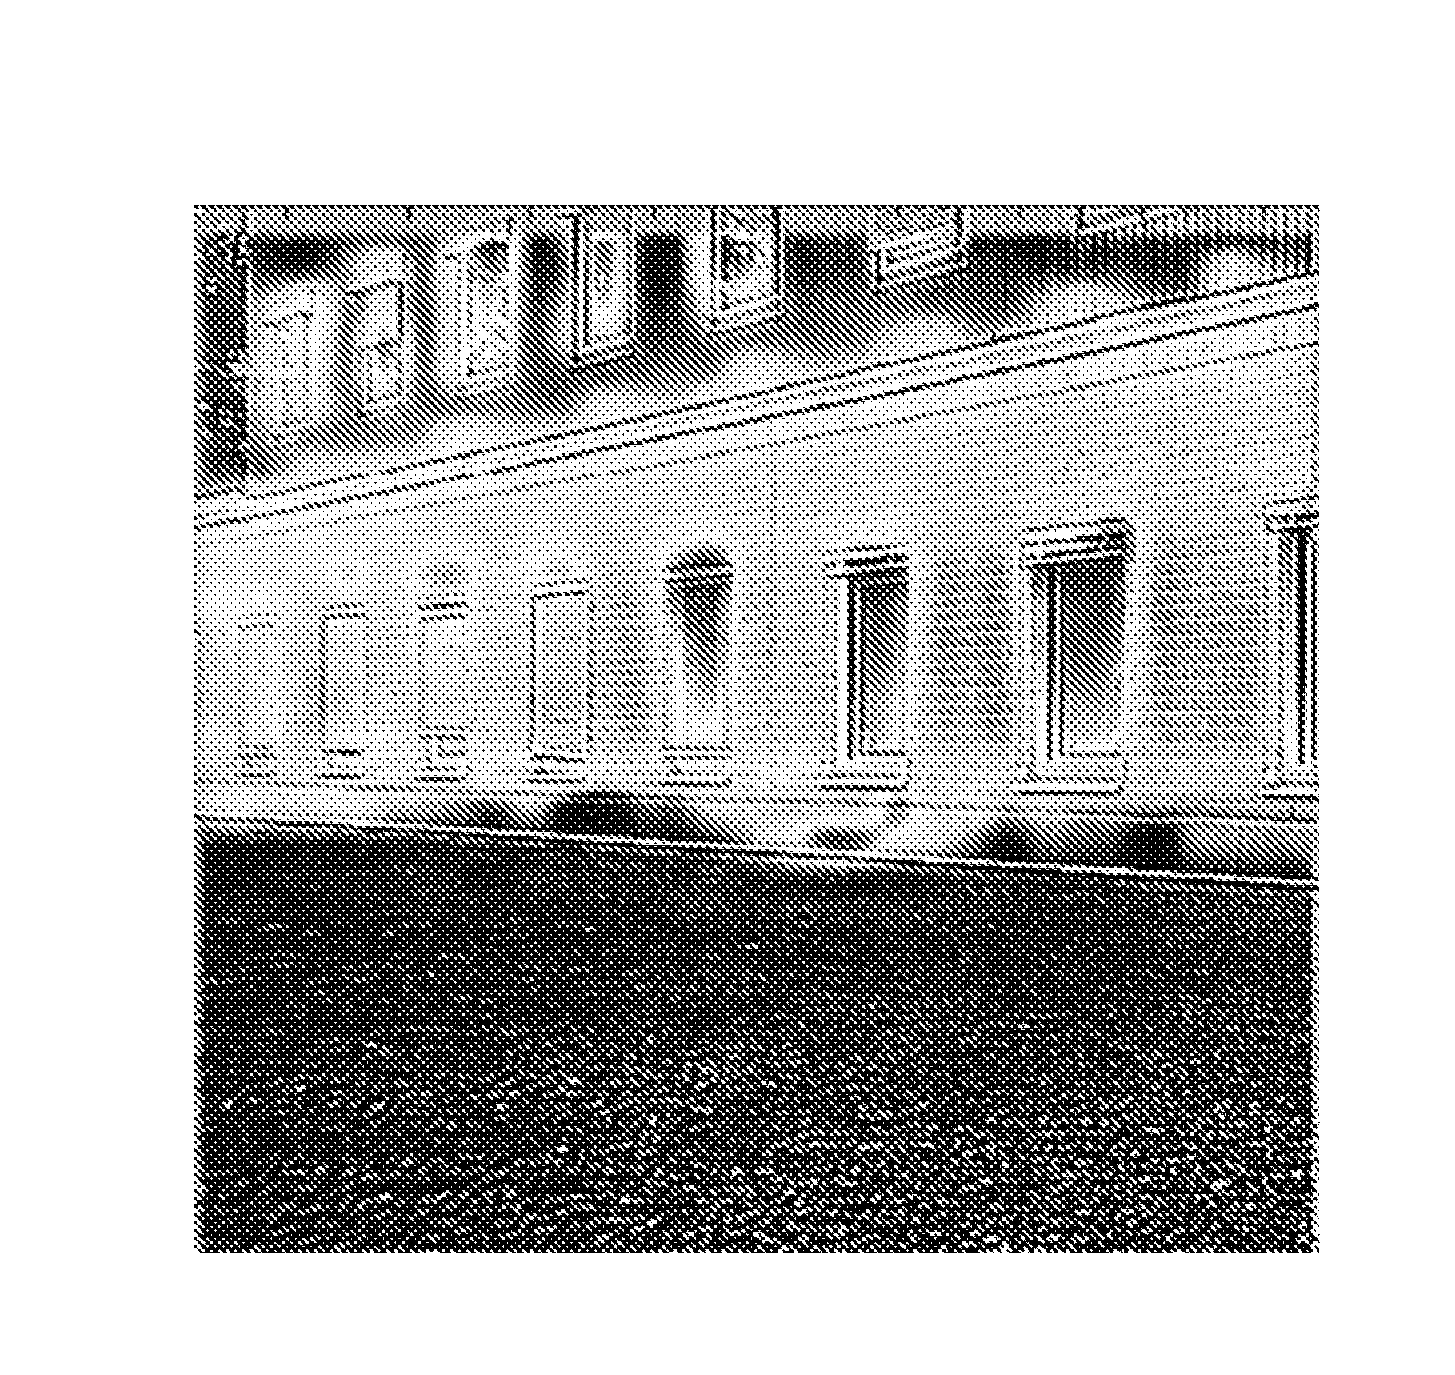 Infrared resolution and contrast enhancement with fusion